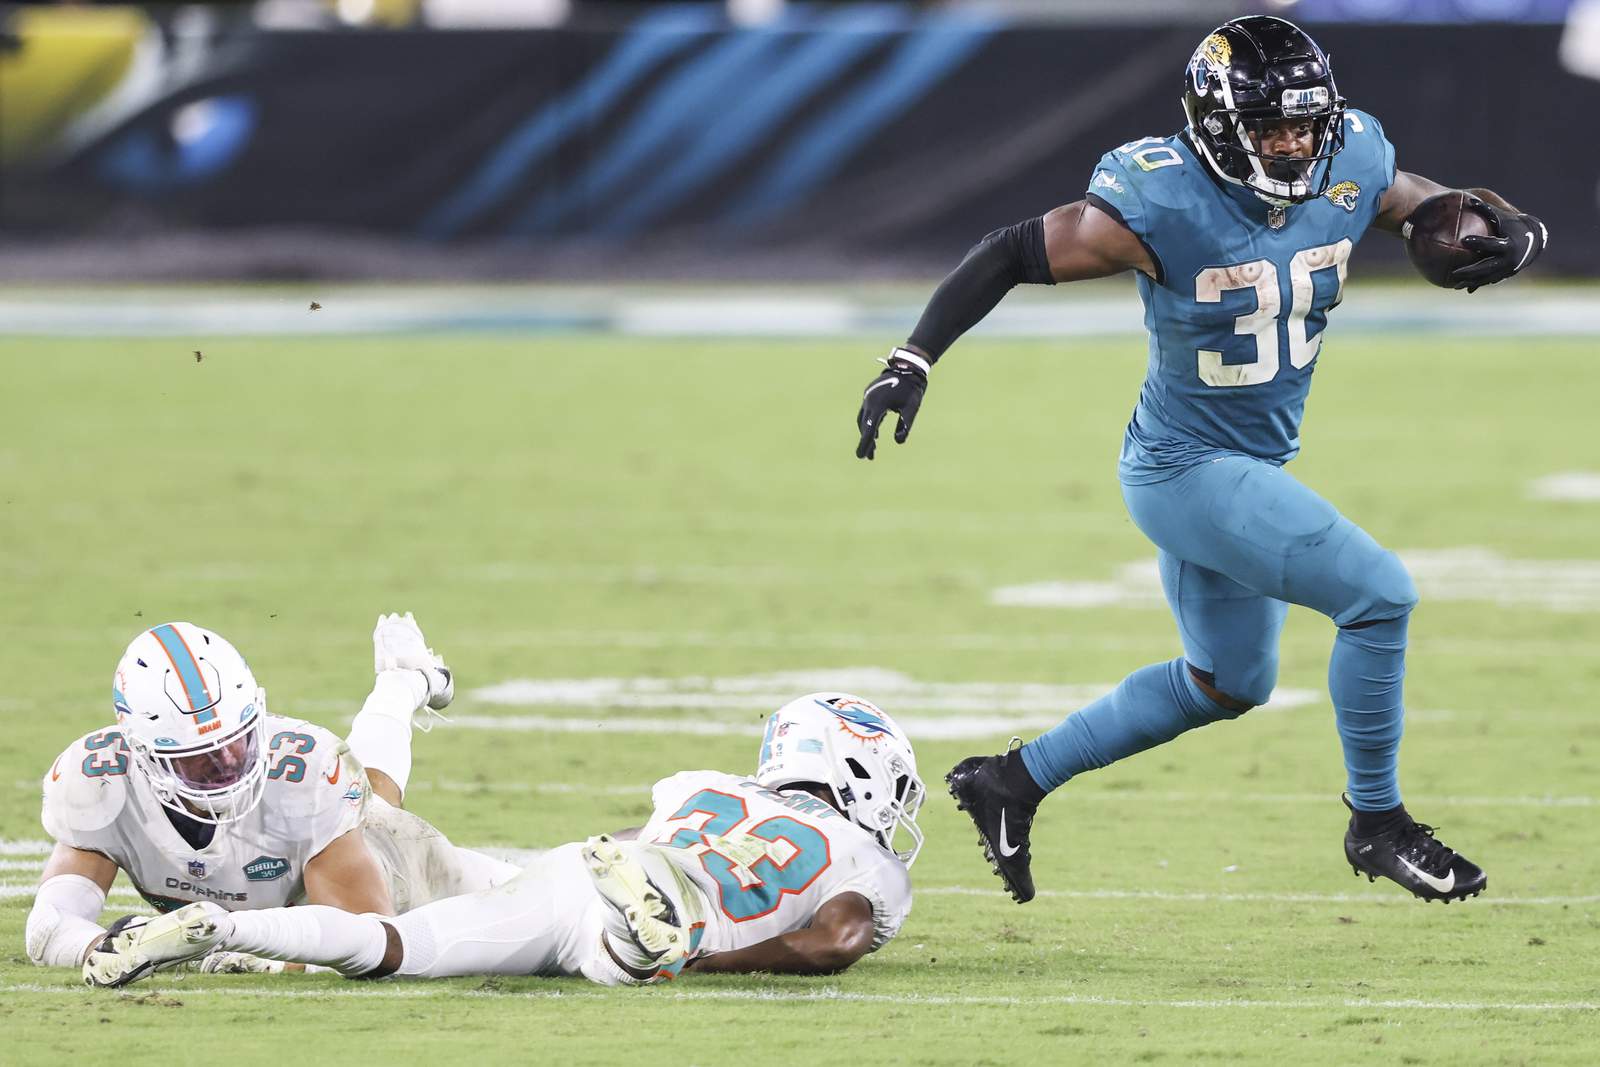 Jaguars’ bright spot, running back James Robinson, wins offensive rookie of month honor